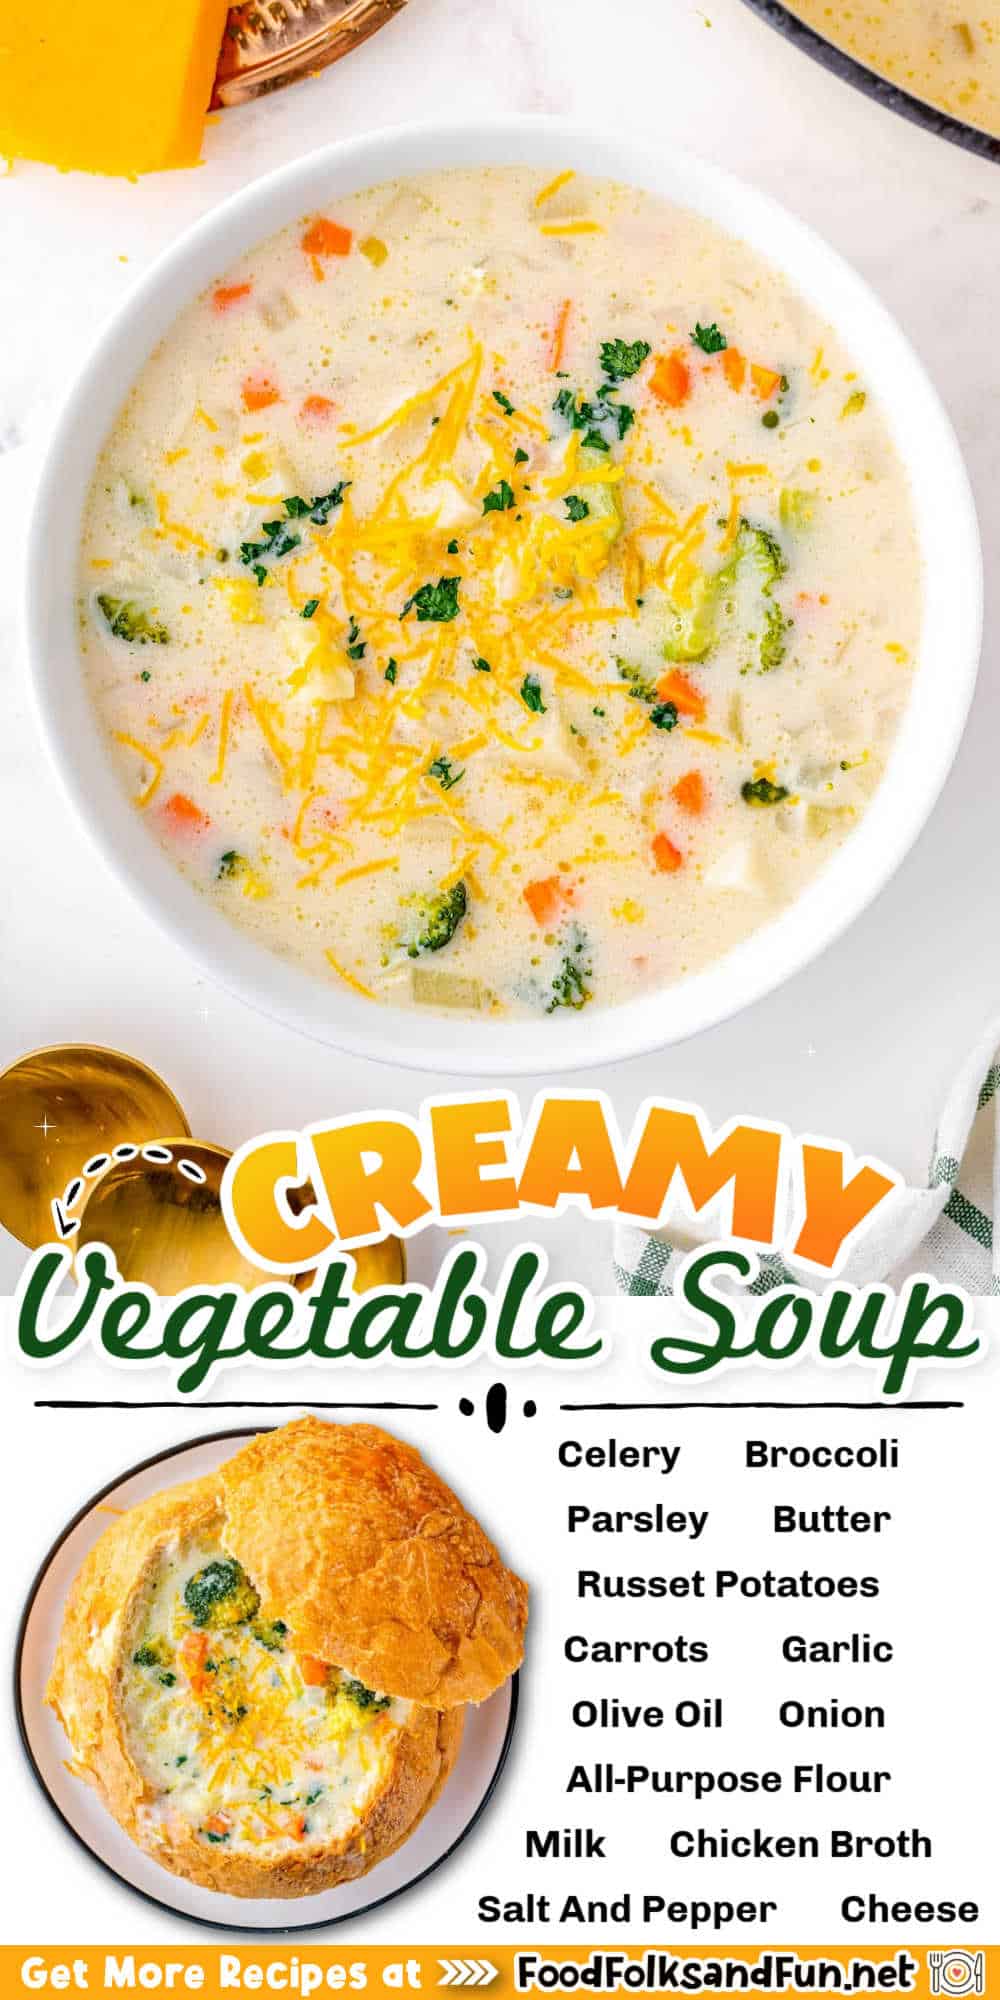 Warm up with a bowl of Creamy Vegetable Soup! Loaded with fresh veggies and comforting flavors, this easy-to-make soup is perfect year round. via @foodfolksandfun